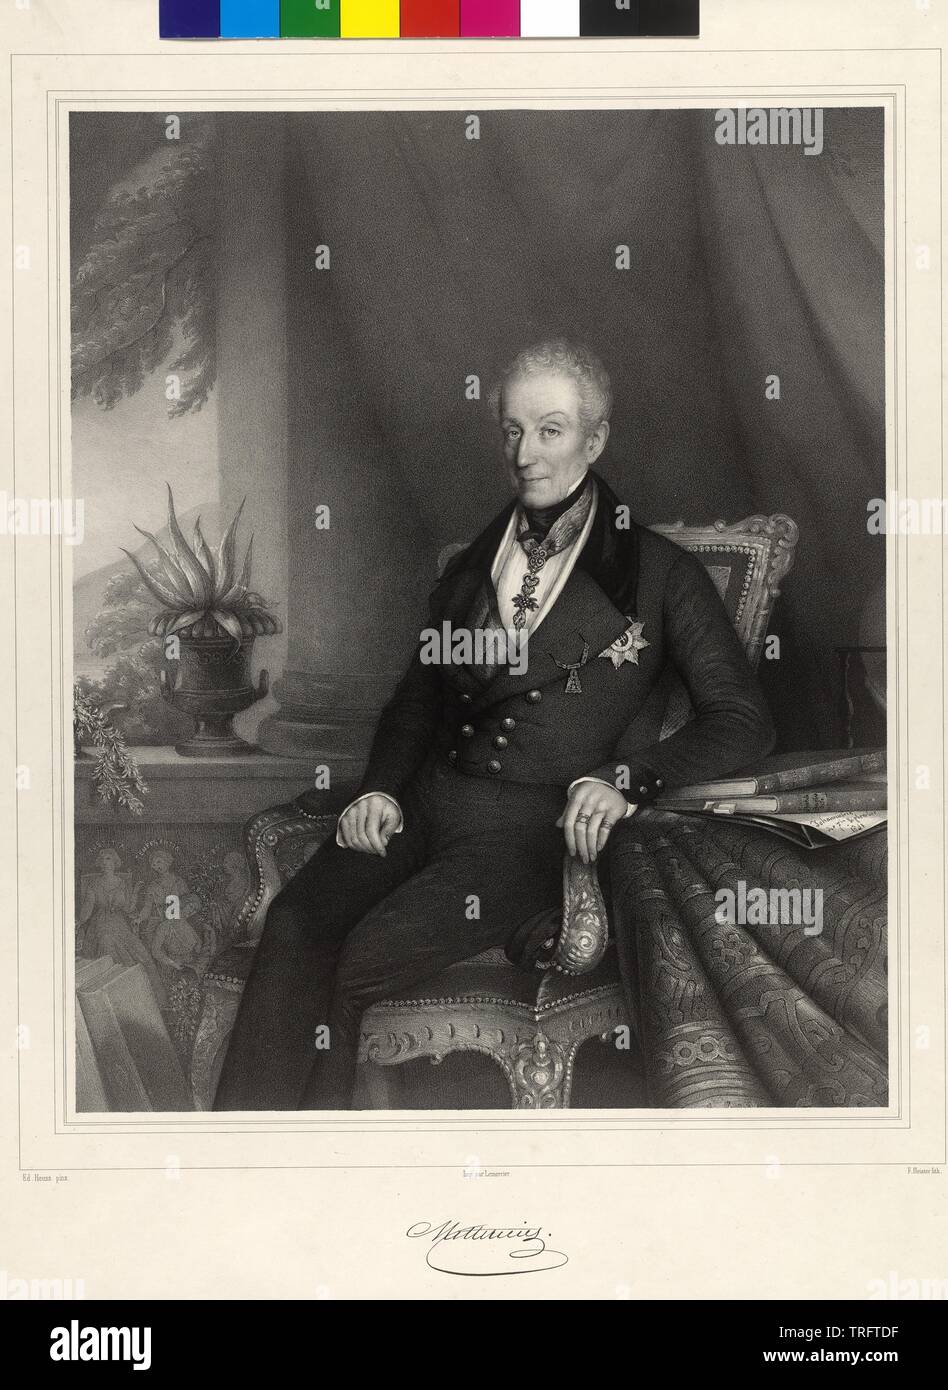 Metternich-Winneburg, Clemente Wenzel Lothar principe von, Additional-Rights-Clearance-Info-Not-Available Foto Stock